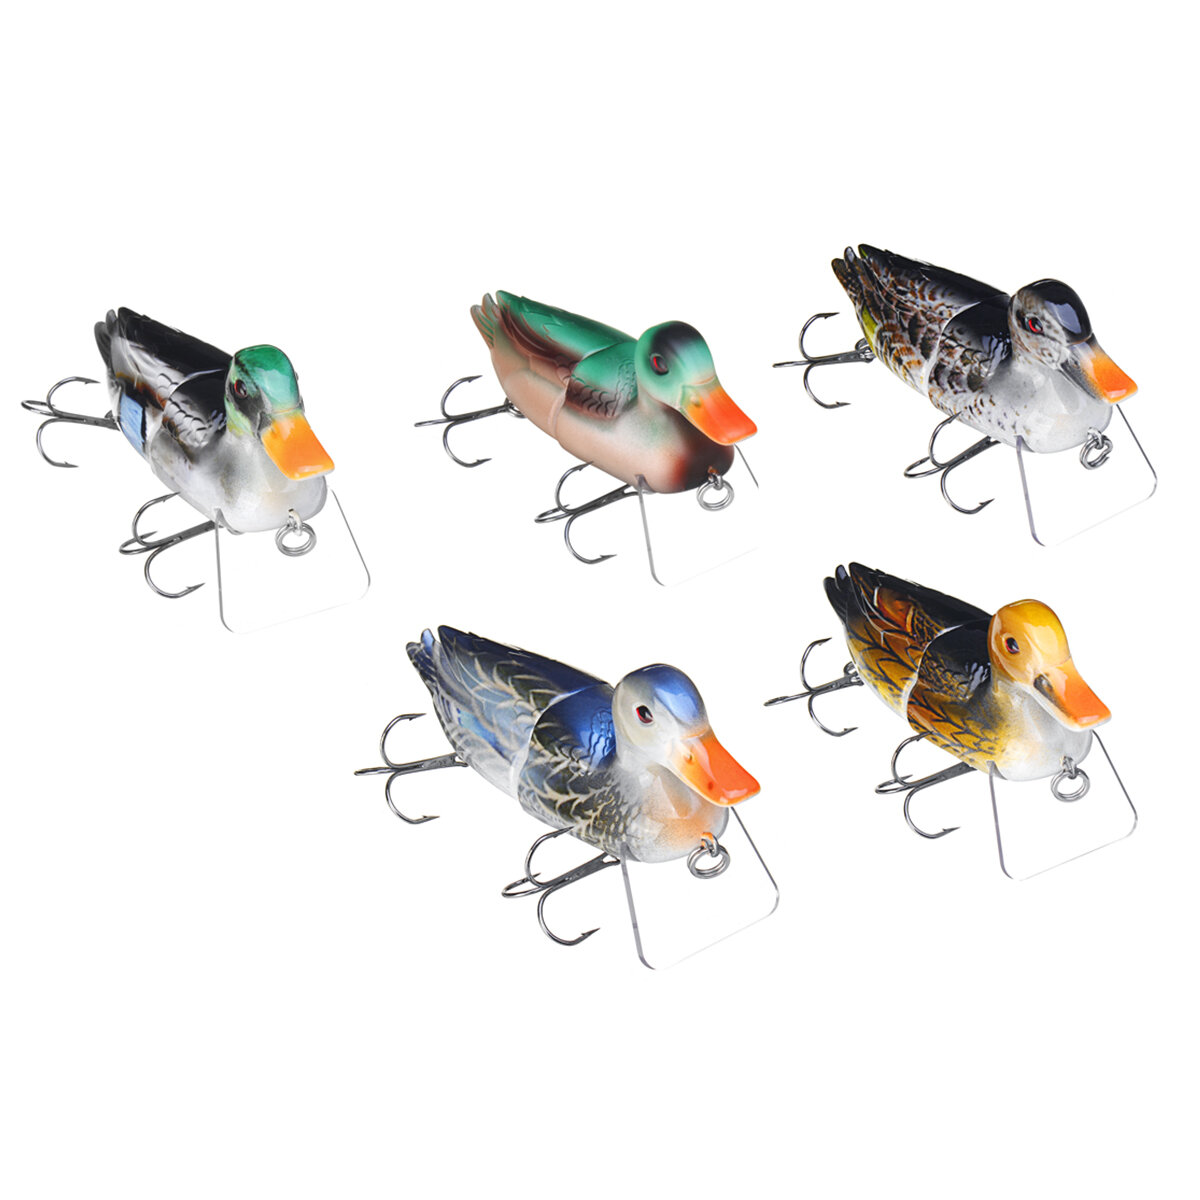 

ZANLURE 1PC 15CM 90g Floating Duck Shape Fishing Lure With Hook Topwater Soft Bait Fishing Tackle